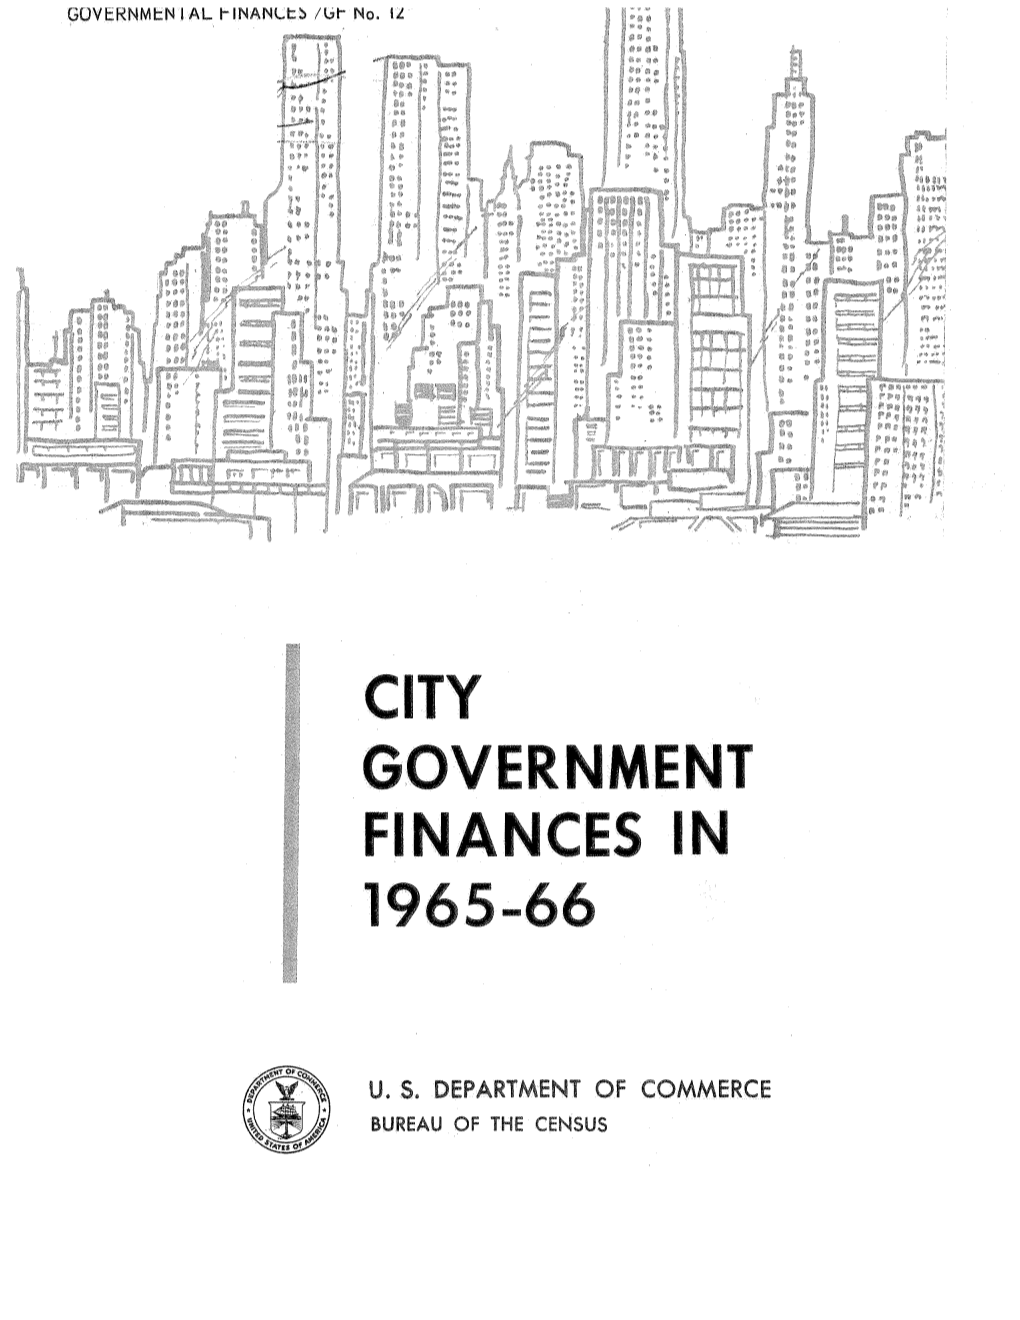 City Government Finances in 1965-66